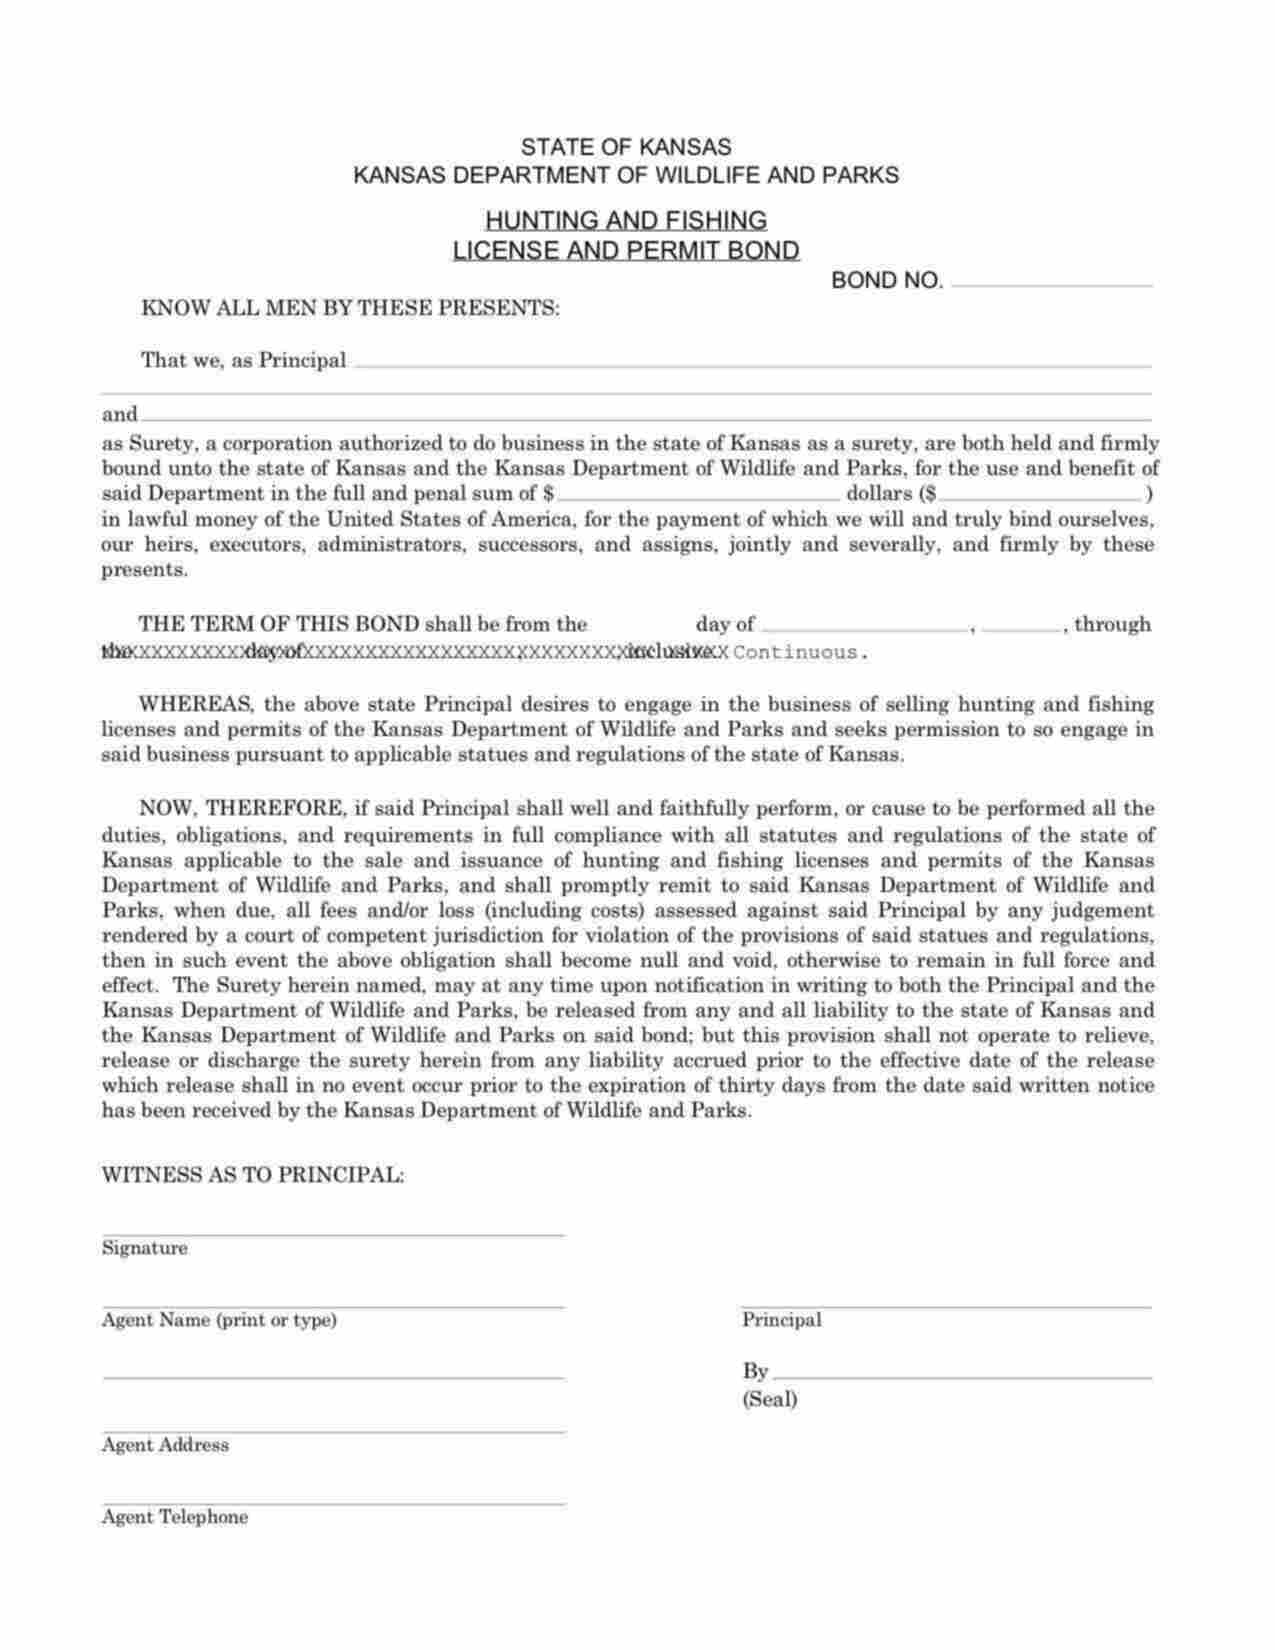 Kansas Hunting and Fishing License and Permit Bond Form